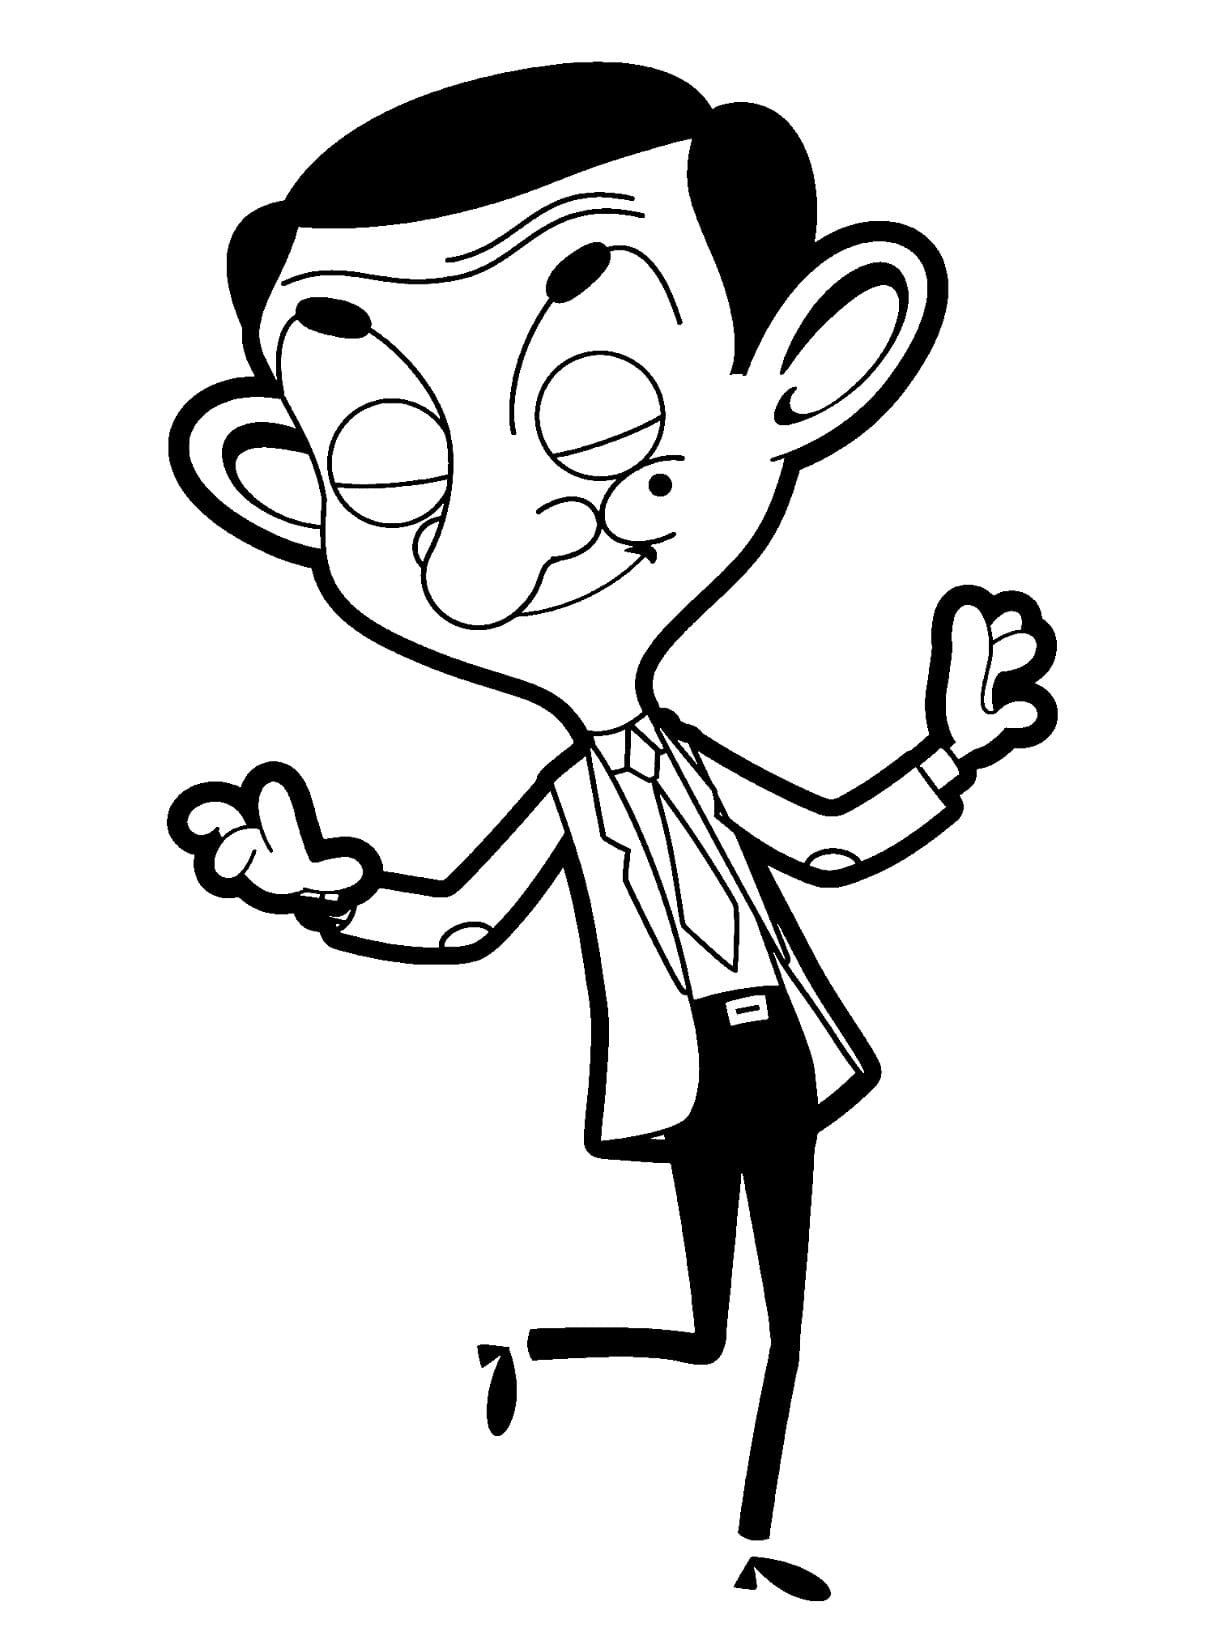 How to draw cartoon Mr Bean - Sketchok easy drawing guides